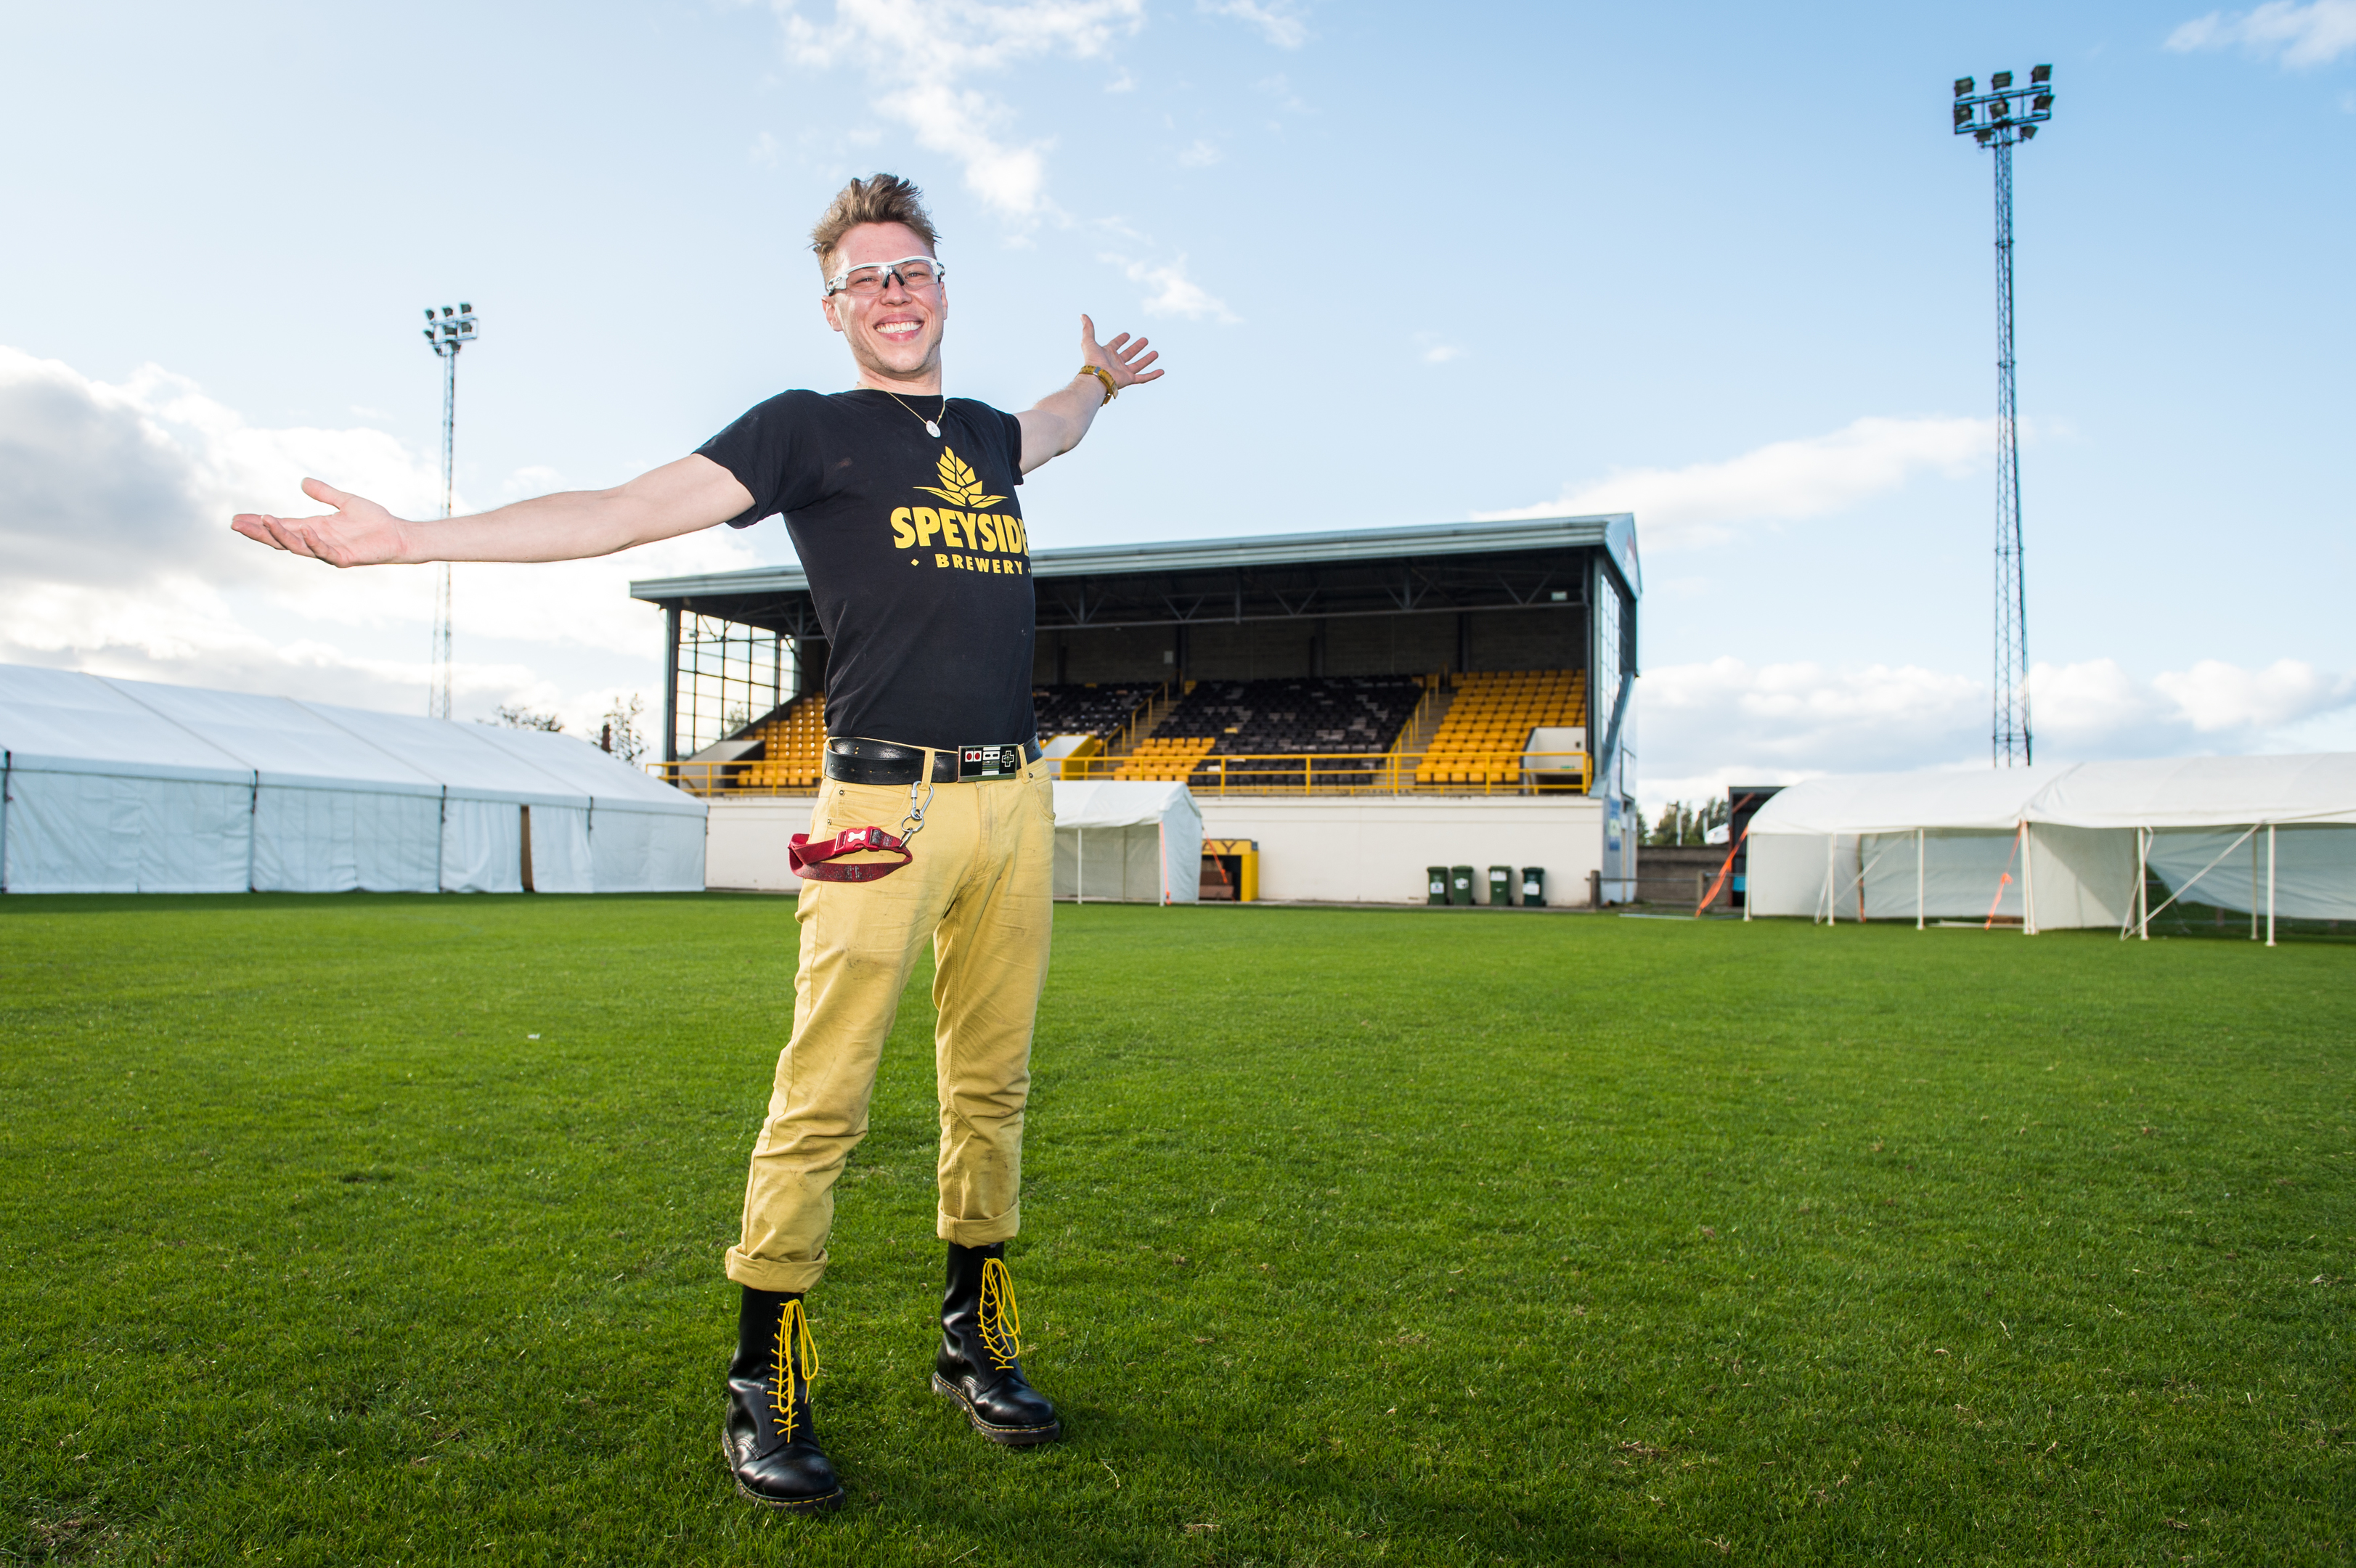 Seb Jones of Speyside Brewery and organiser of Pitch Perfect Festival held at Forres Mechanics Football Ground.